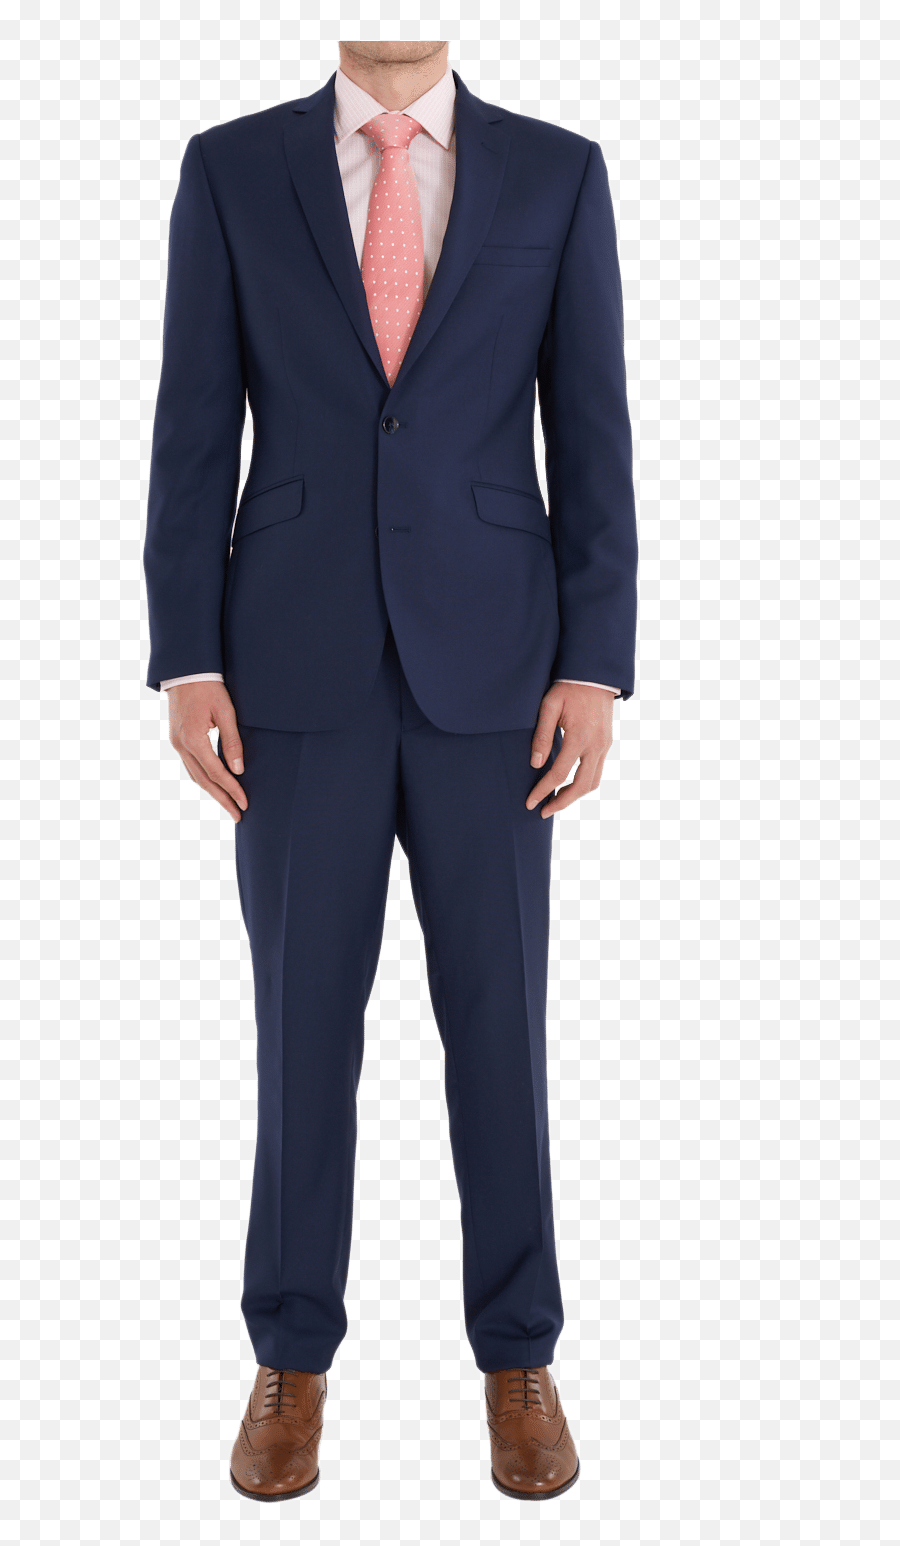 The Bond - Suit Png,Suit And Tie Png